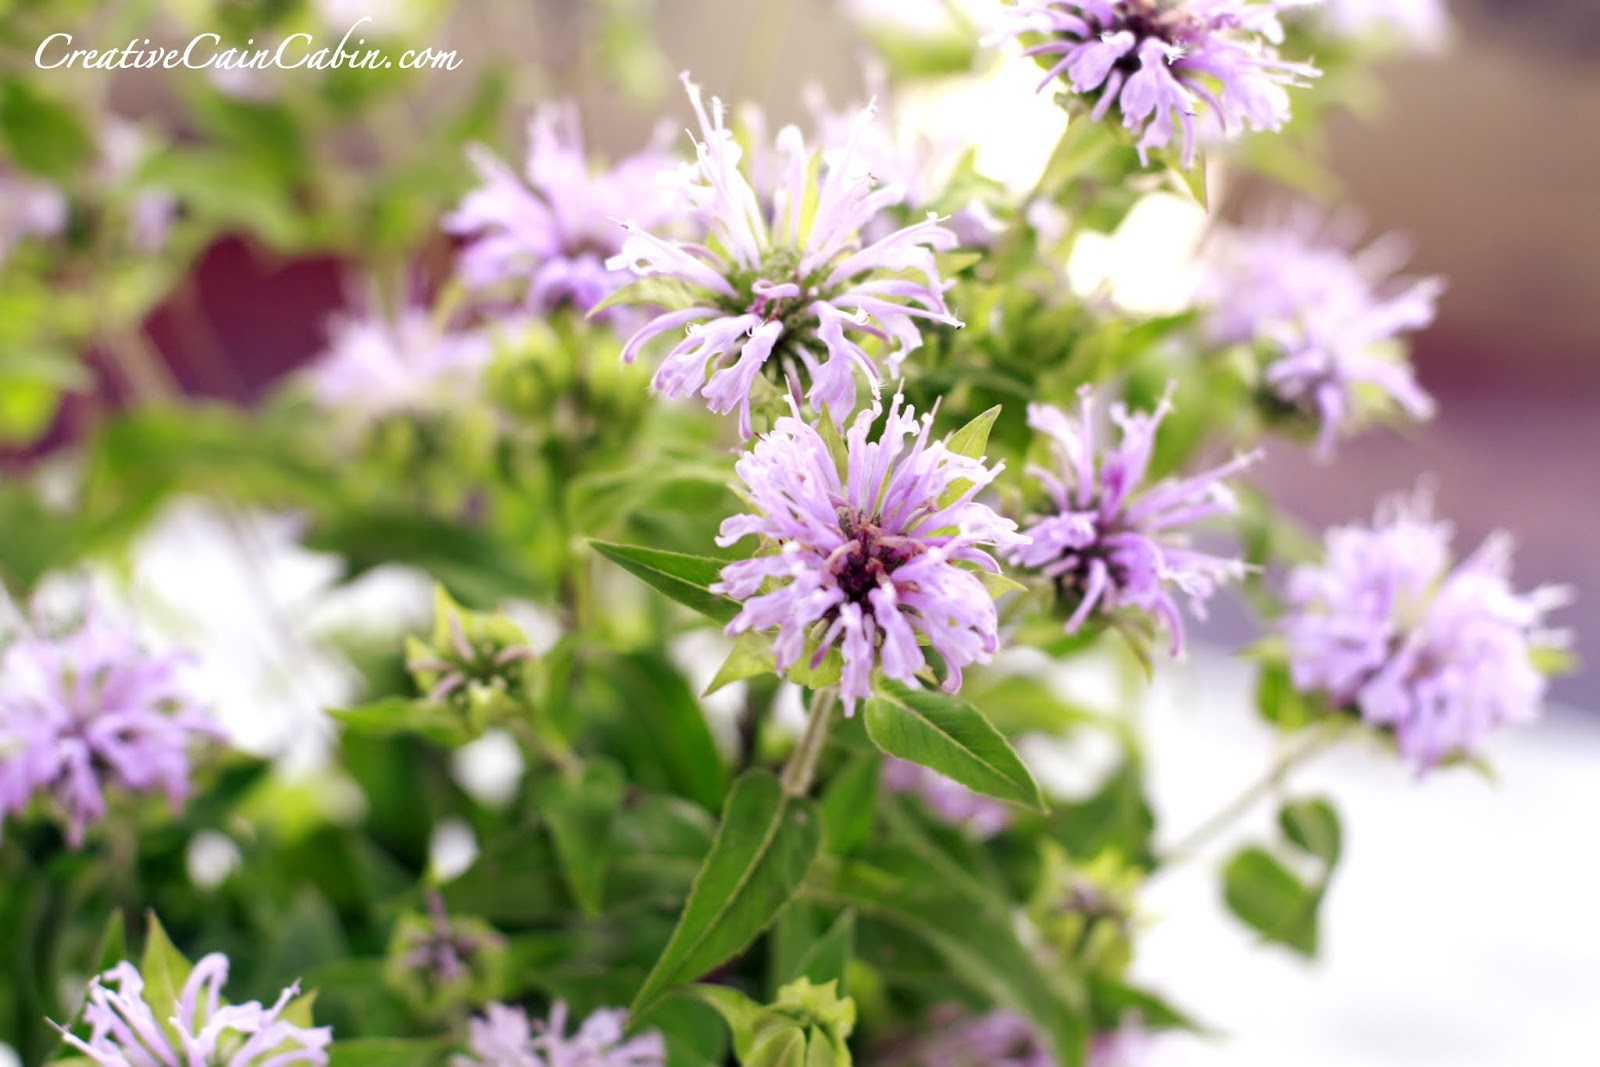 The flowers are a soft lavender color with bright green foliage.